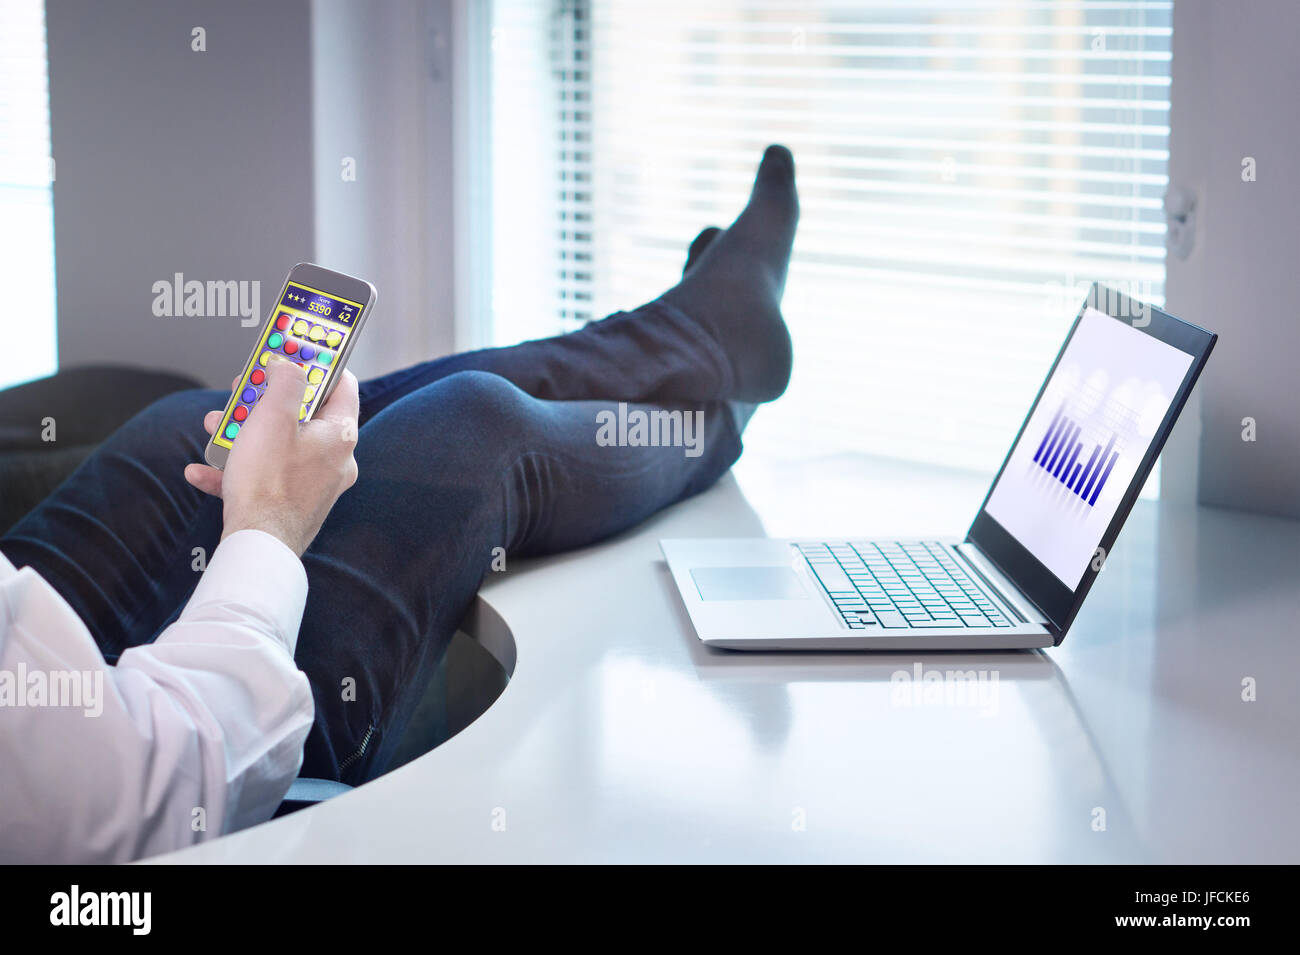 Lazy office worker playing mobile game with smartphone during work hours. Avoiding his job and being lazy with feet and socks on table. Stock Photo